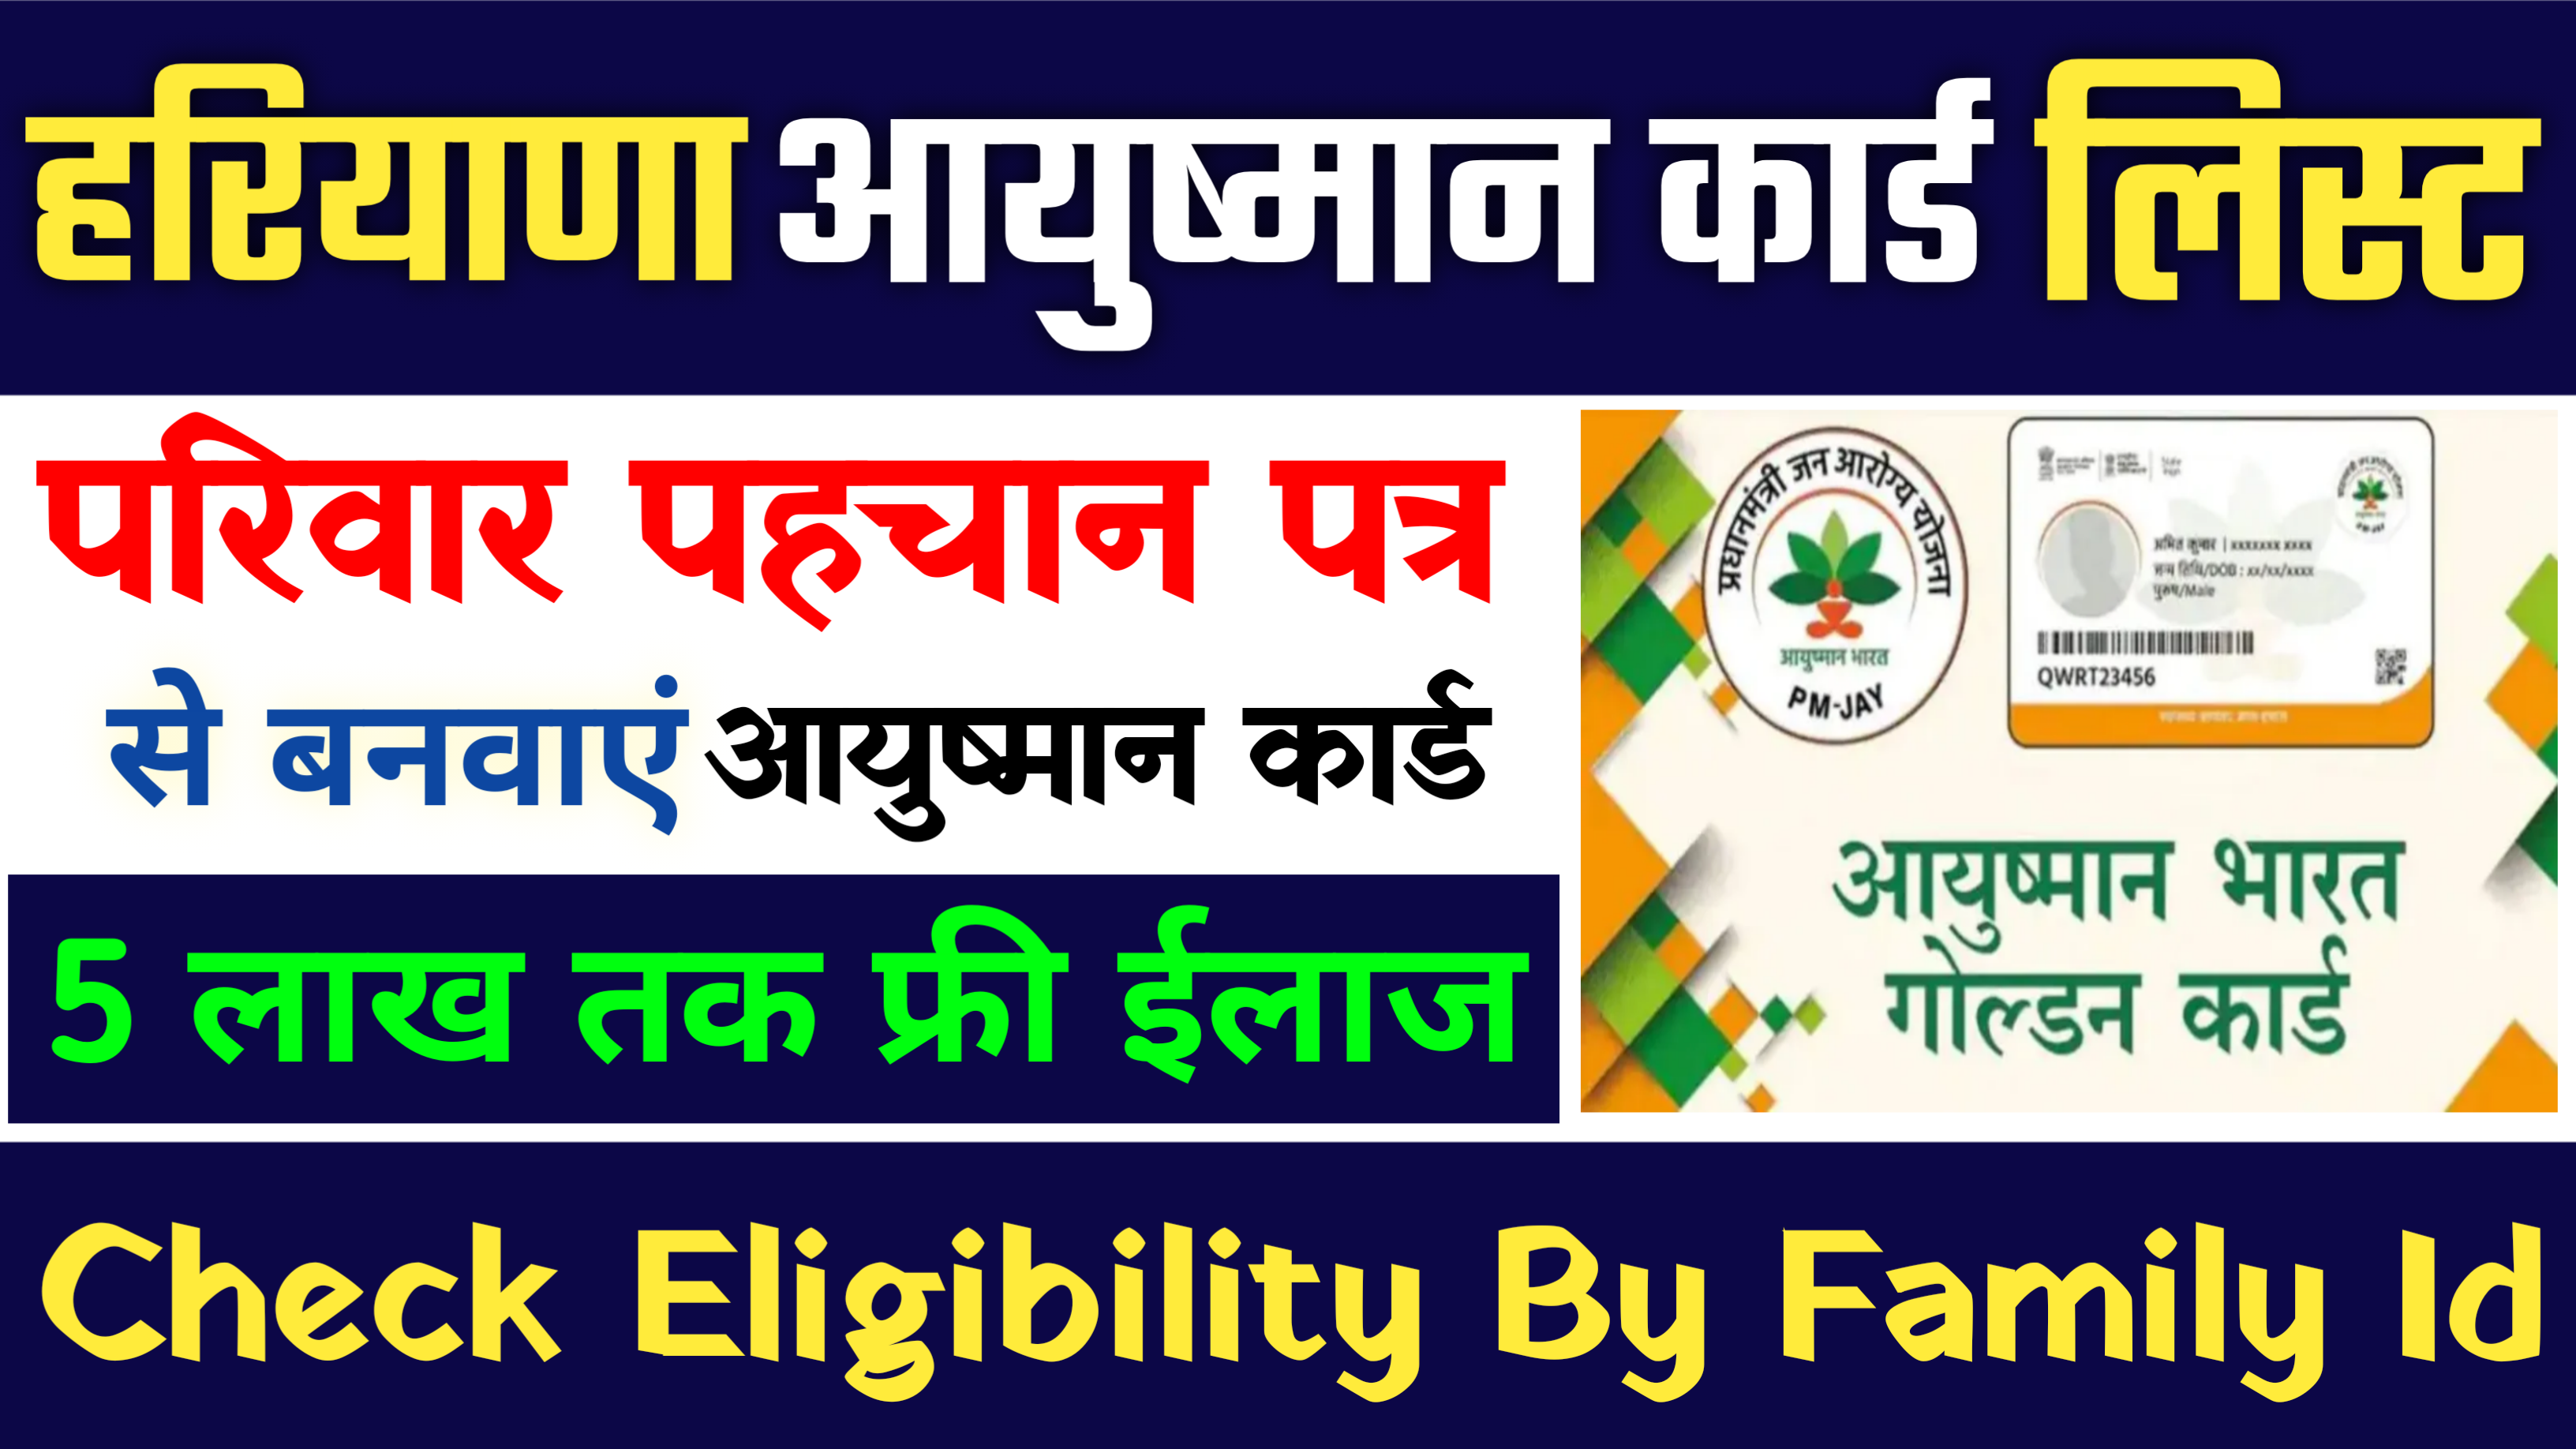 Check Ayushman Card Eligibility by Family Id